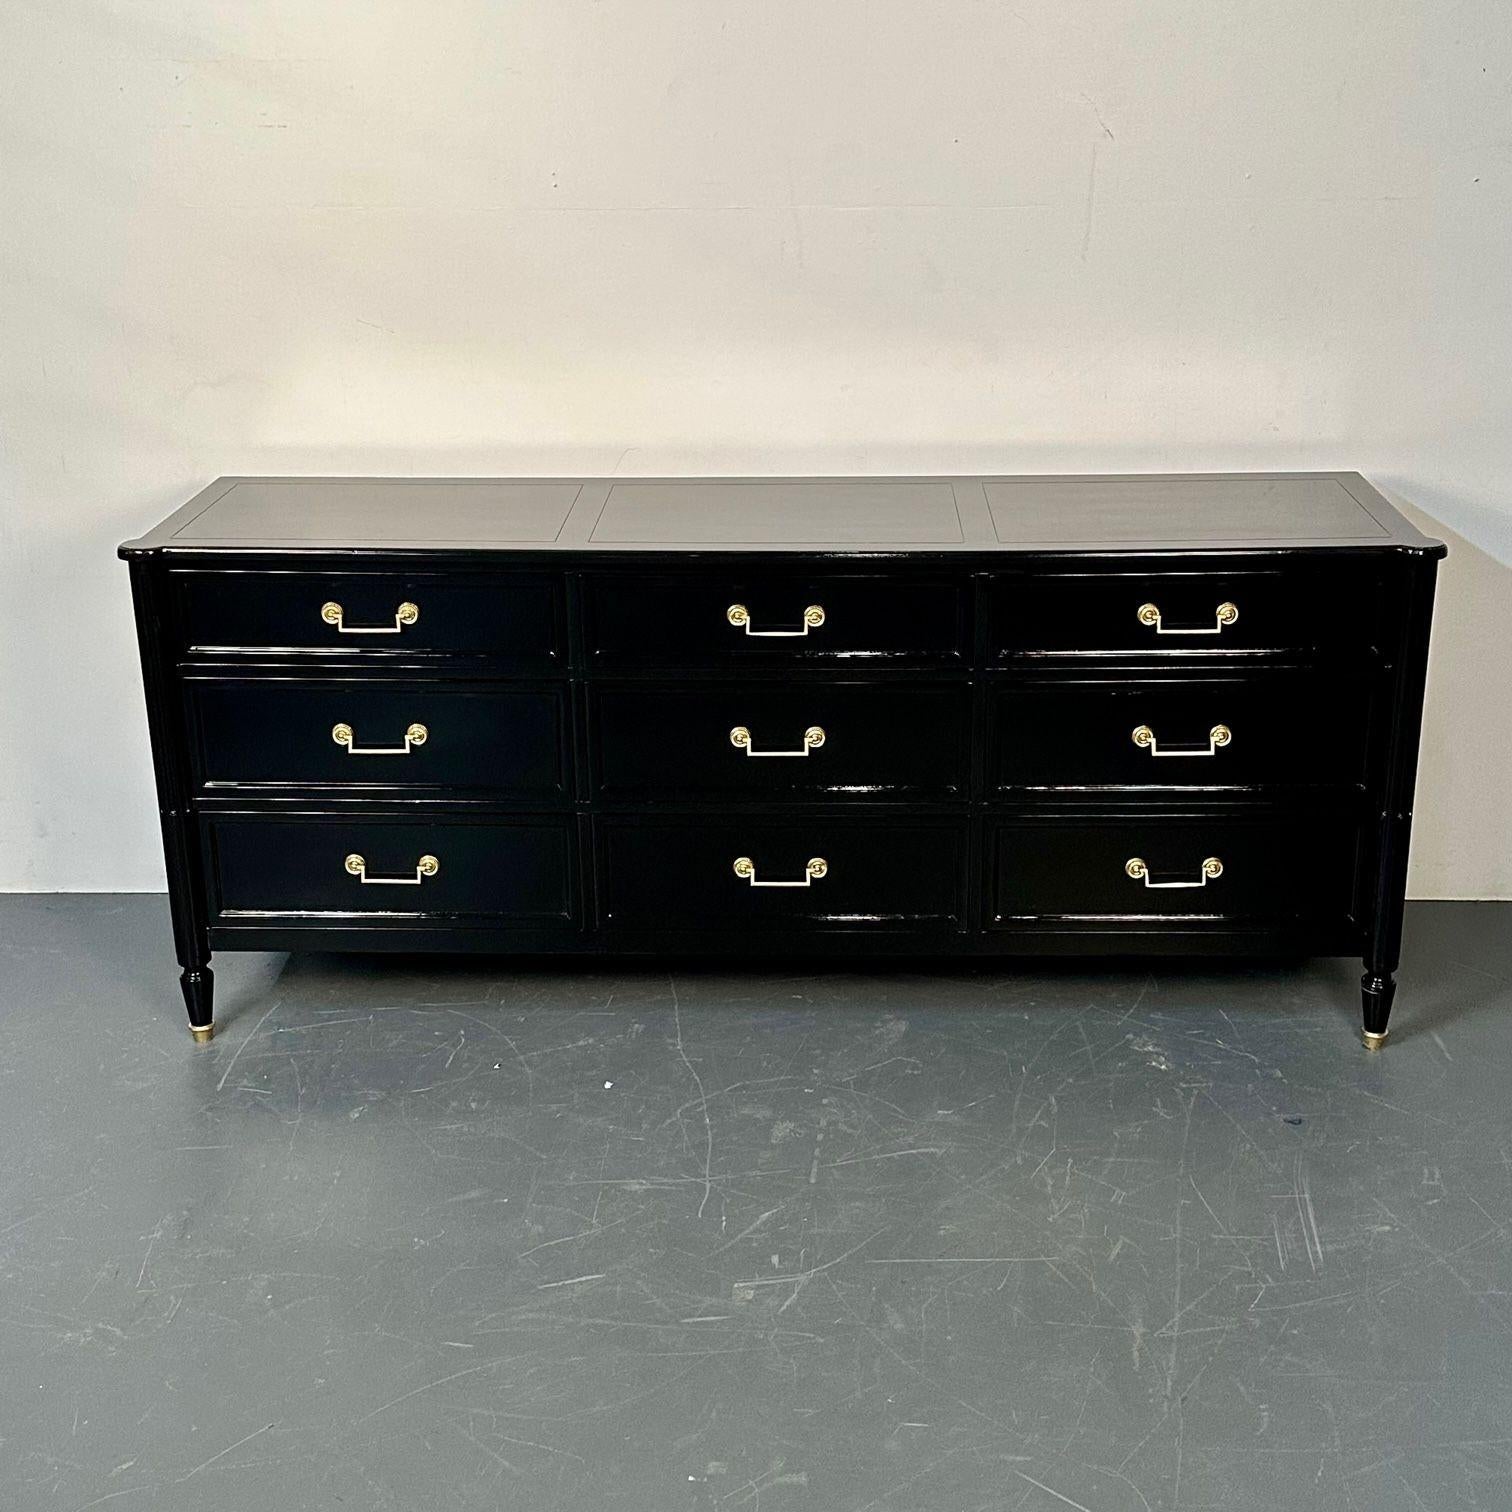 Hollywood Regency Louis XVI Style Ebony Lacquered Dresser / Chest of Drawers
A nine drawer Maison Jansen Style Ebony Dresser or Chest by Milling Road for Baker Furniture Company. Recently refinished and cleaned with solid bronze drawer pulls. An